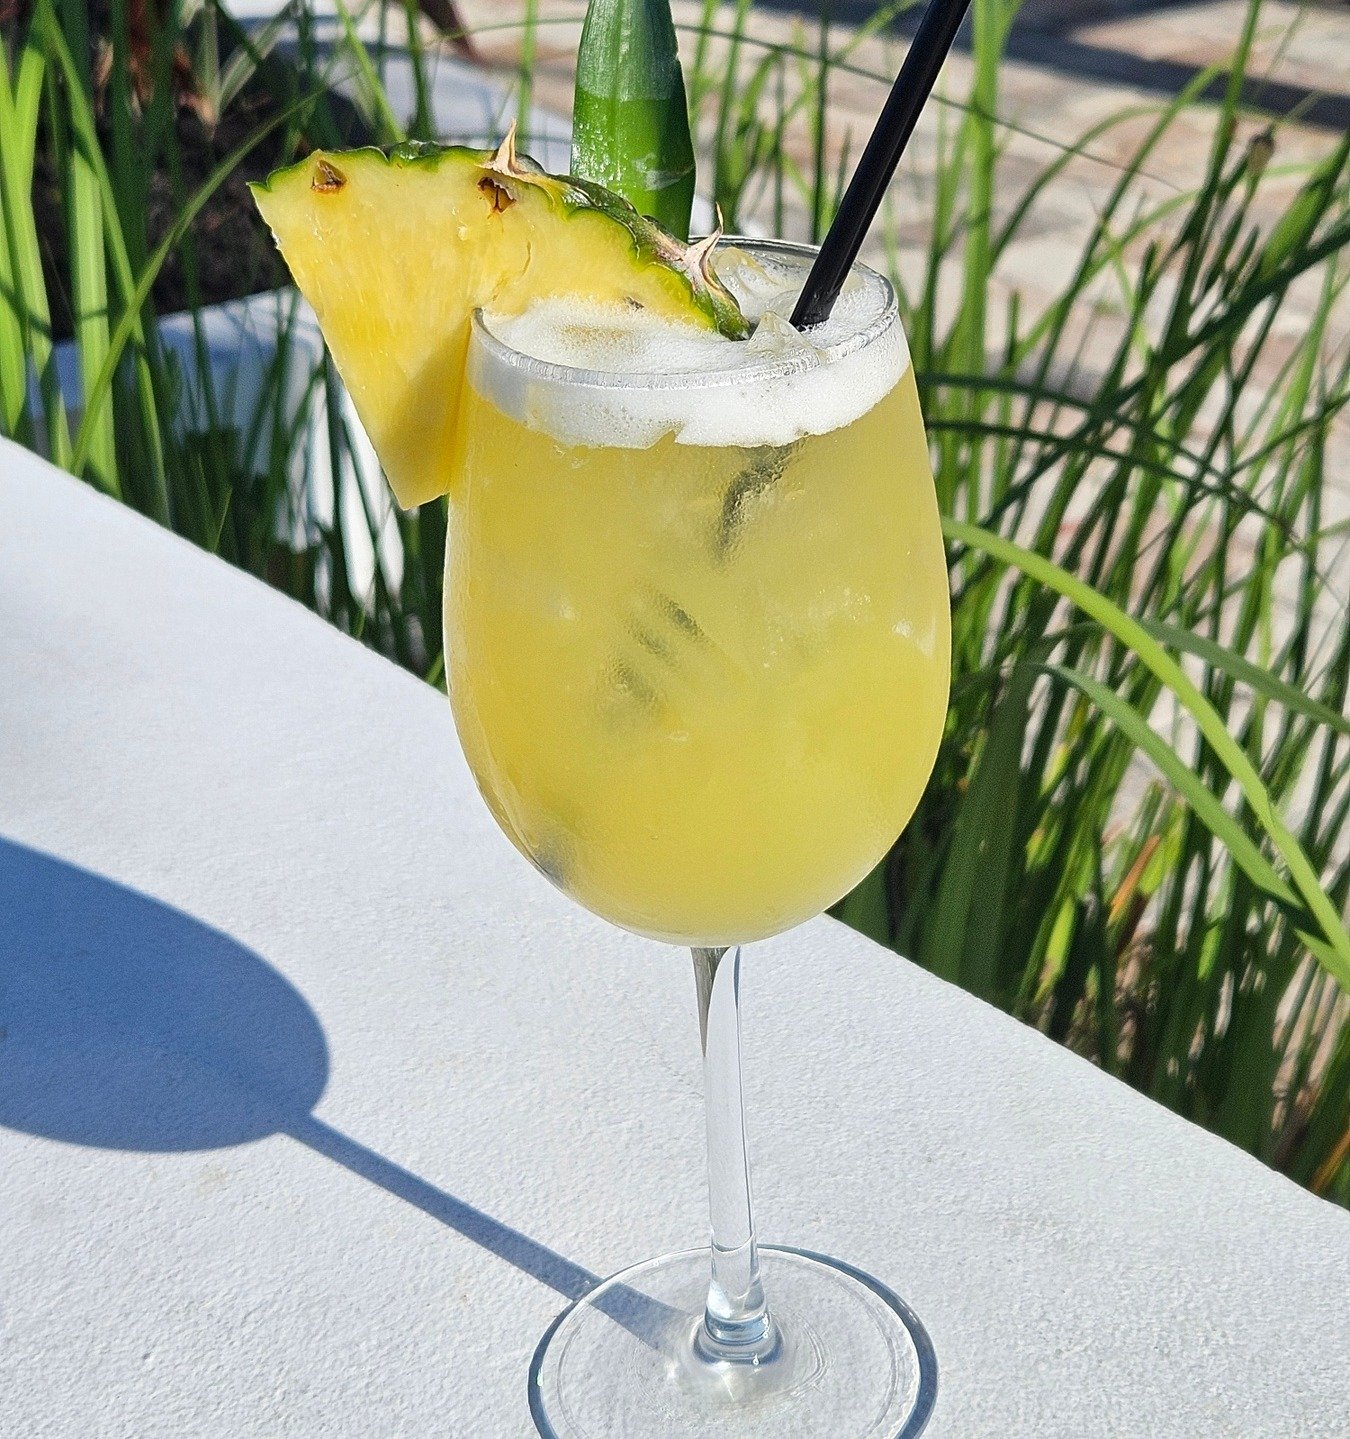 Peep these must-try featured items😍 

🍹 Tropic Like It's Hot featuring Wicked Dolphin Pineapple Rum and Mango Rum, pineapple juice and Sprite
🍽️ Crab Rangoons